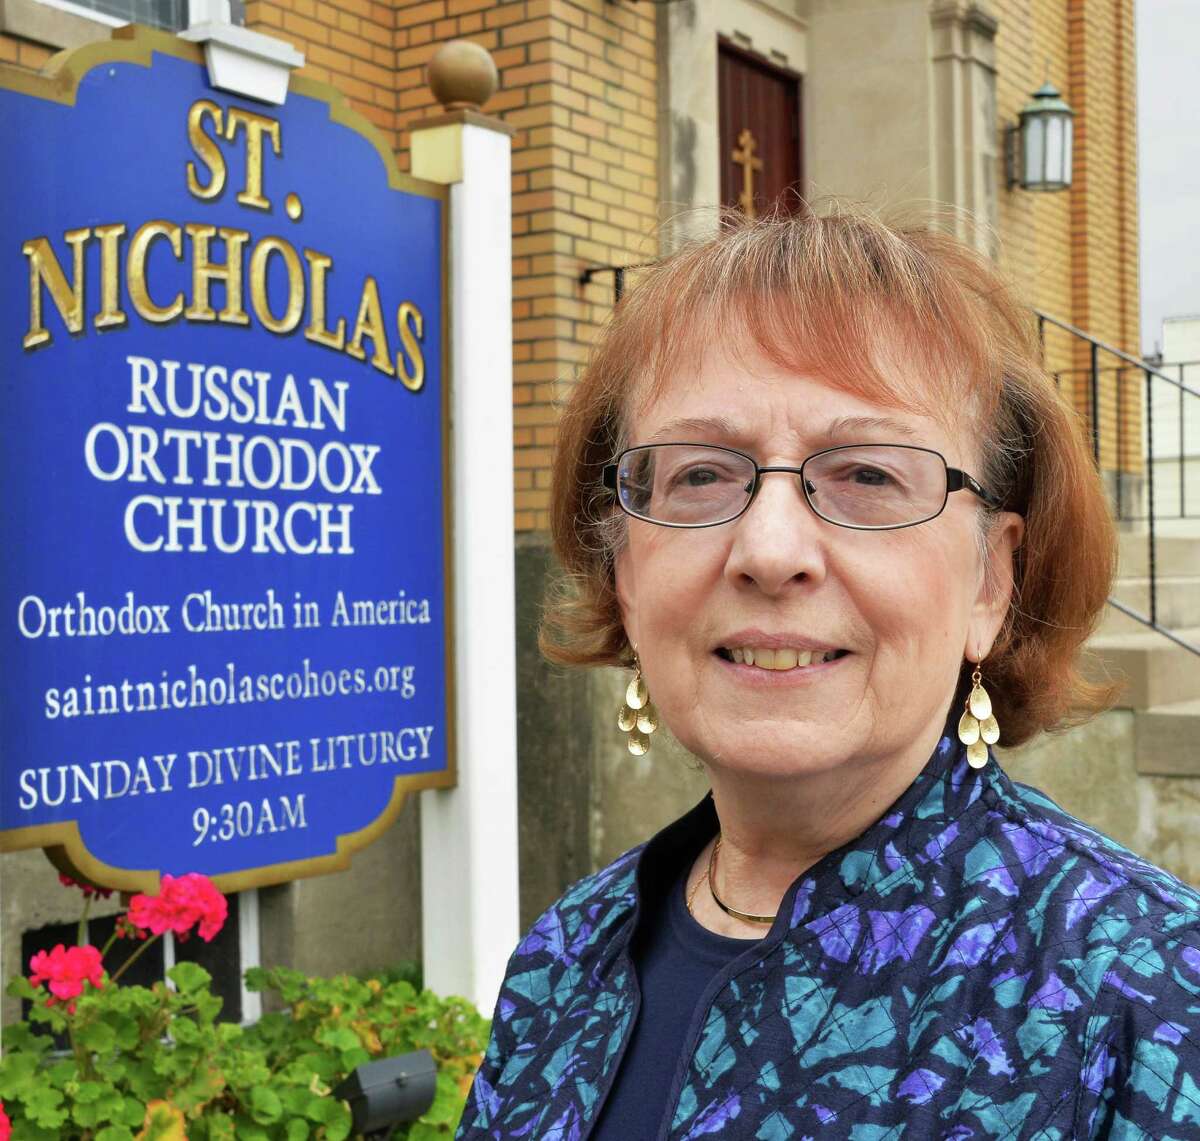 Life-long parisher Stephanie Stroyen of Stoughton, Mass. and Cohoes outside St. Nicholas Orthodox Church Thursday Oct. 2, 2014, in Cohoes, NY. (John Carl D'Annibale / Times Union)